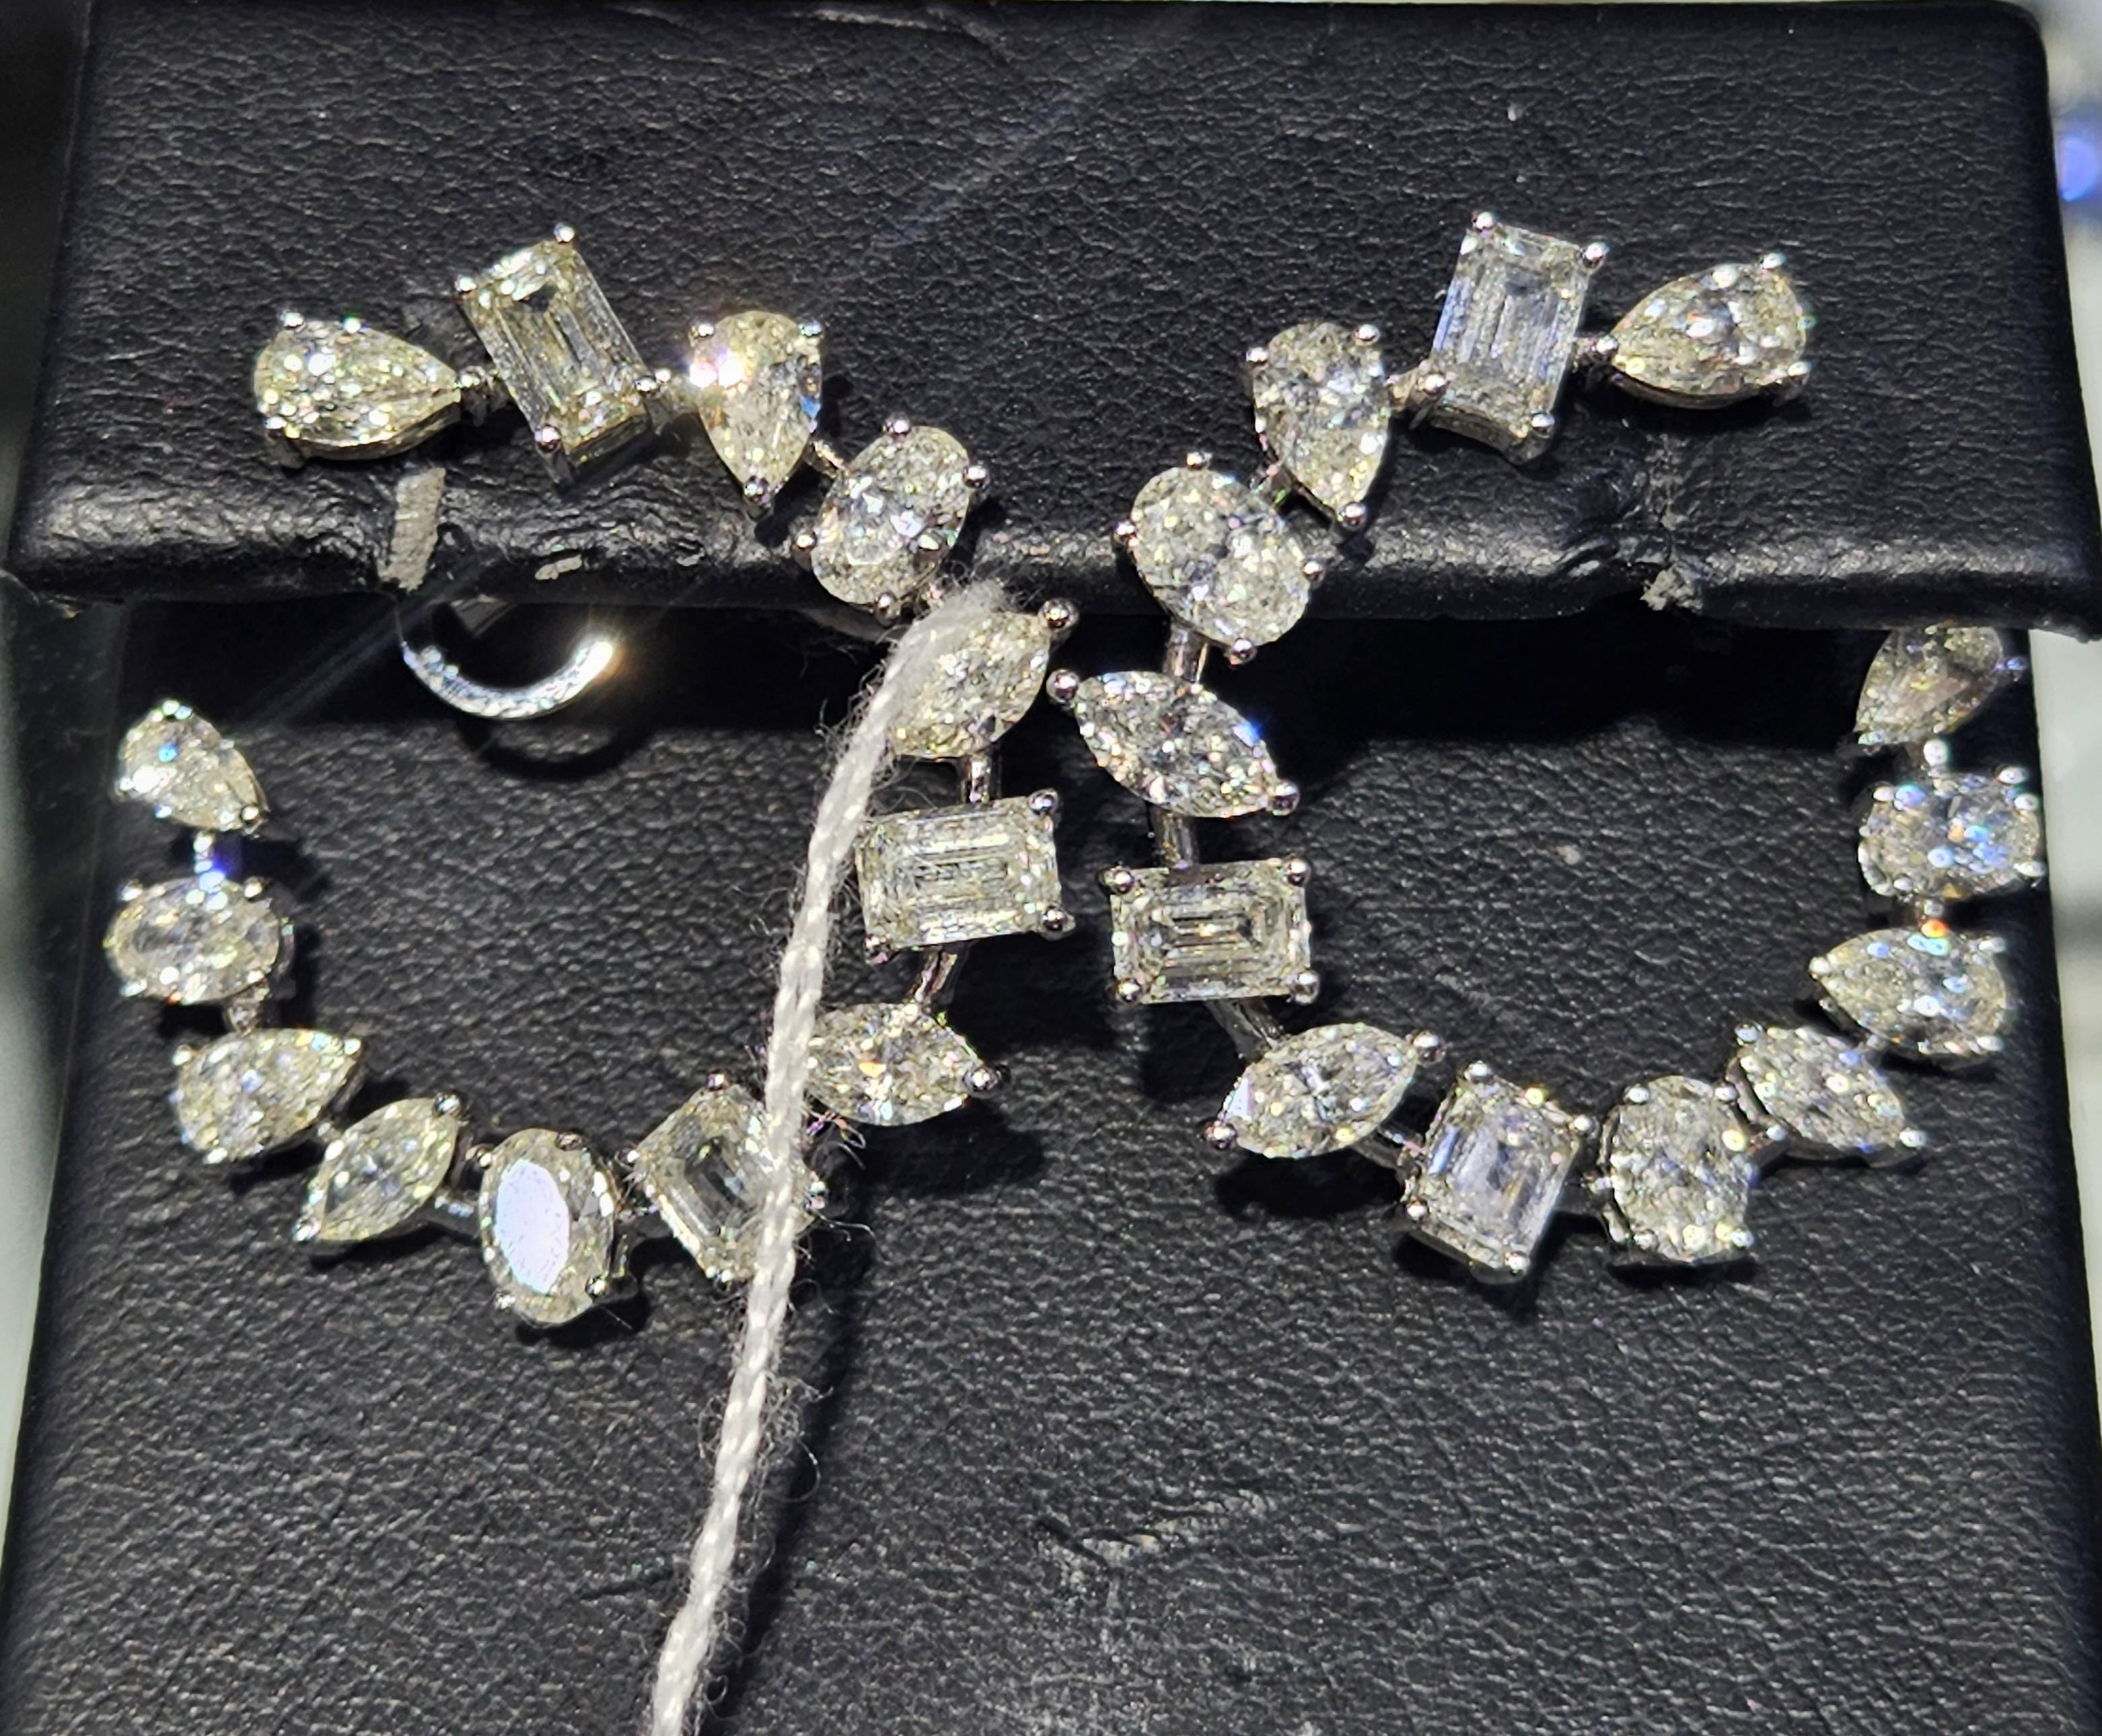 The Following Item we are offering is a Rare Important Radiant 18KT Gold Large Rare Fancy Gorgeous Glittering Fancy Diamond Hoop Earrings. Earrings are comprised of a Gorgeous Array of Fancy Glittering Assorted Shaped Diamonds overlapping!!! T.C.W.